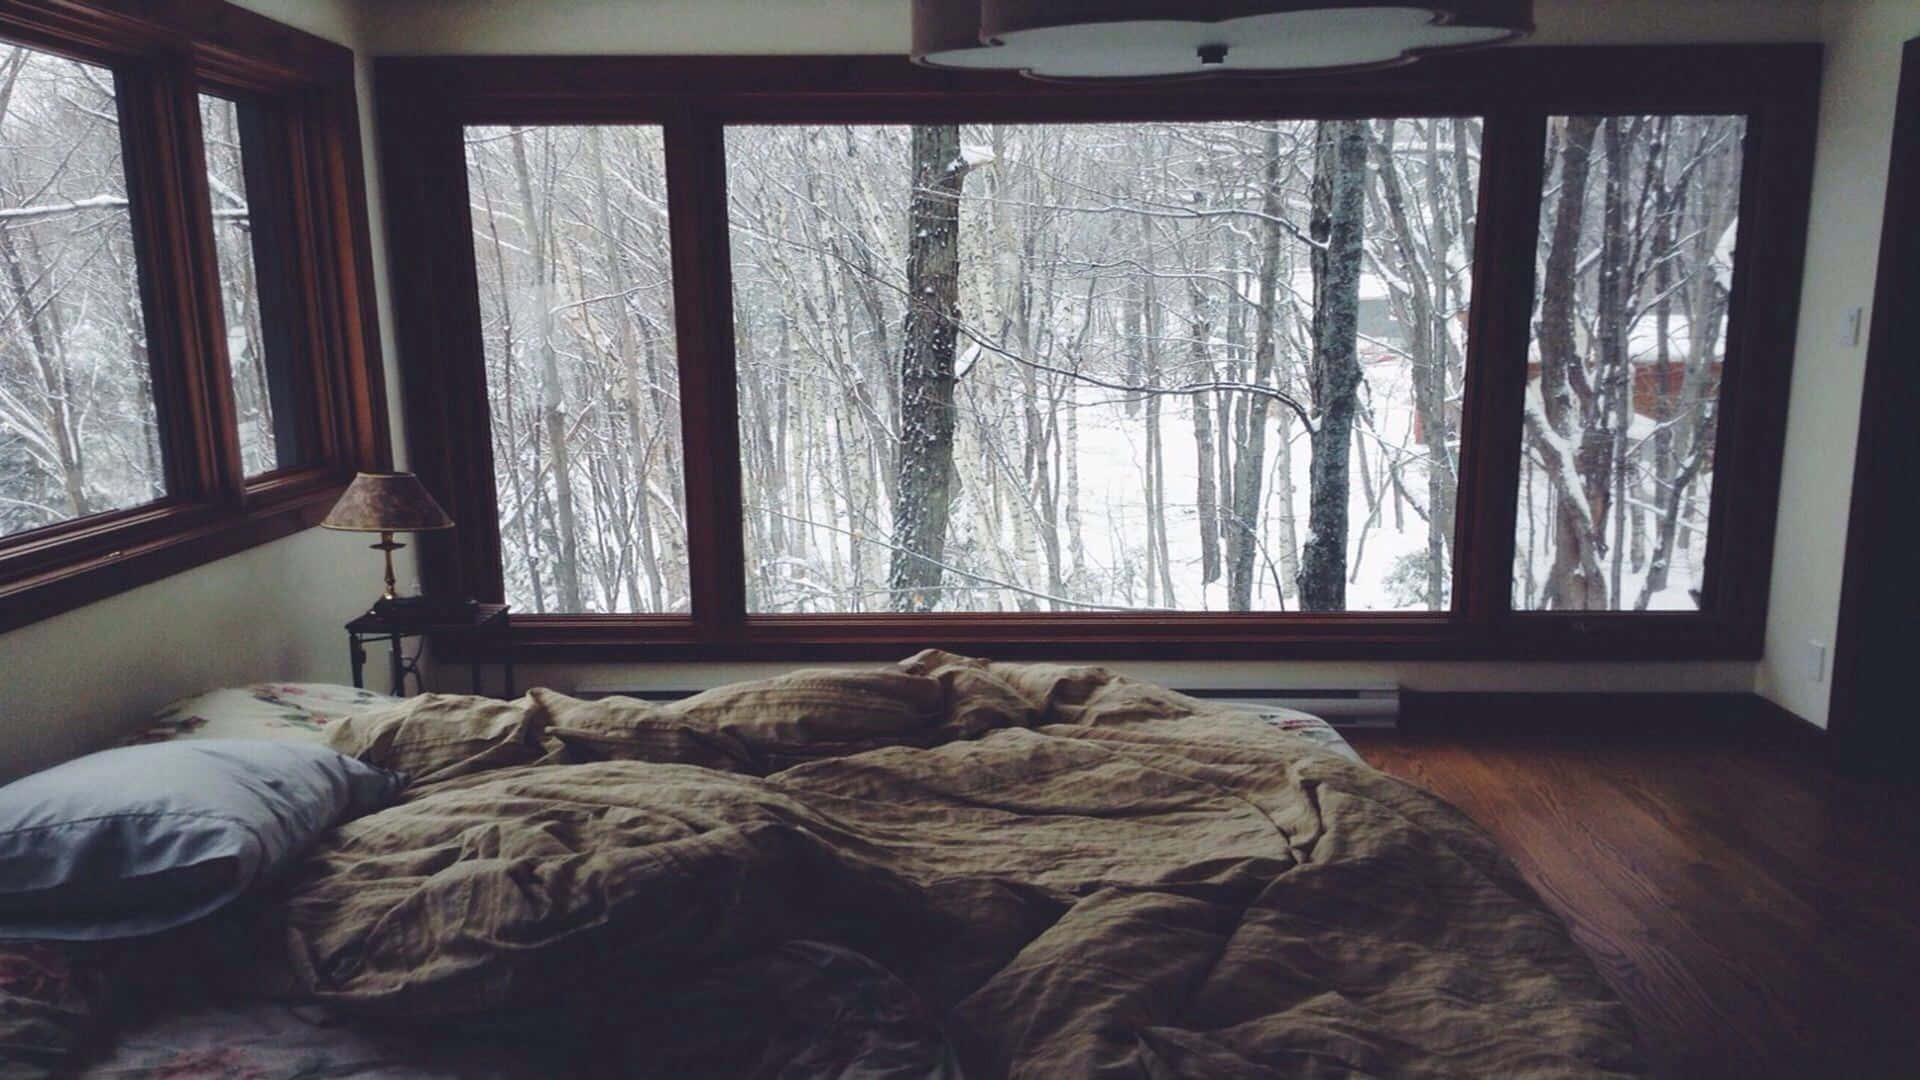 A Bed With A Blanket On It And A Window Background